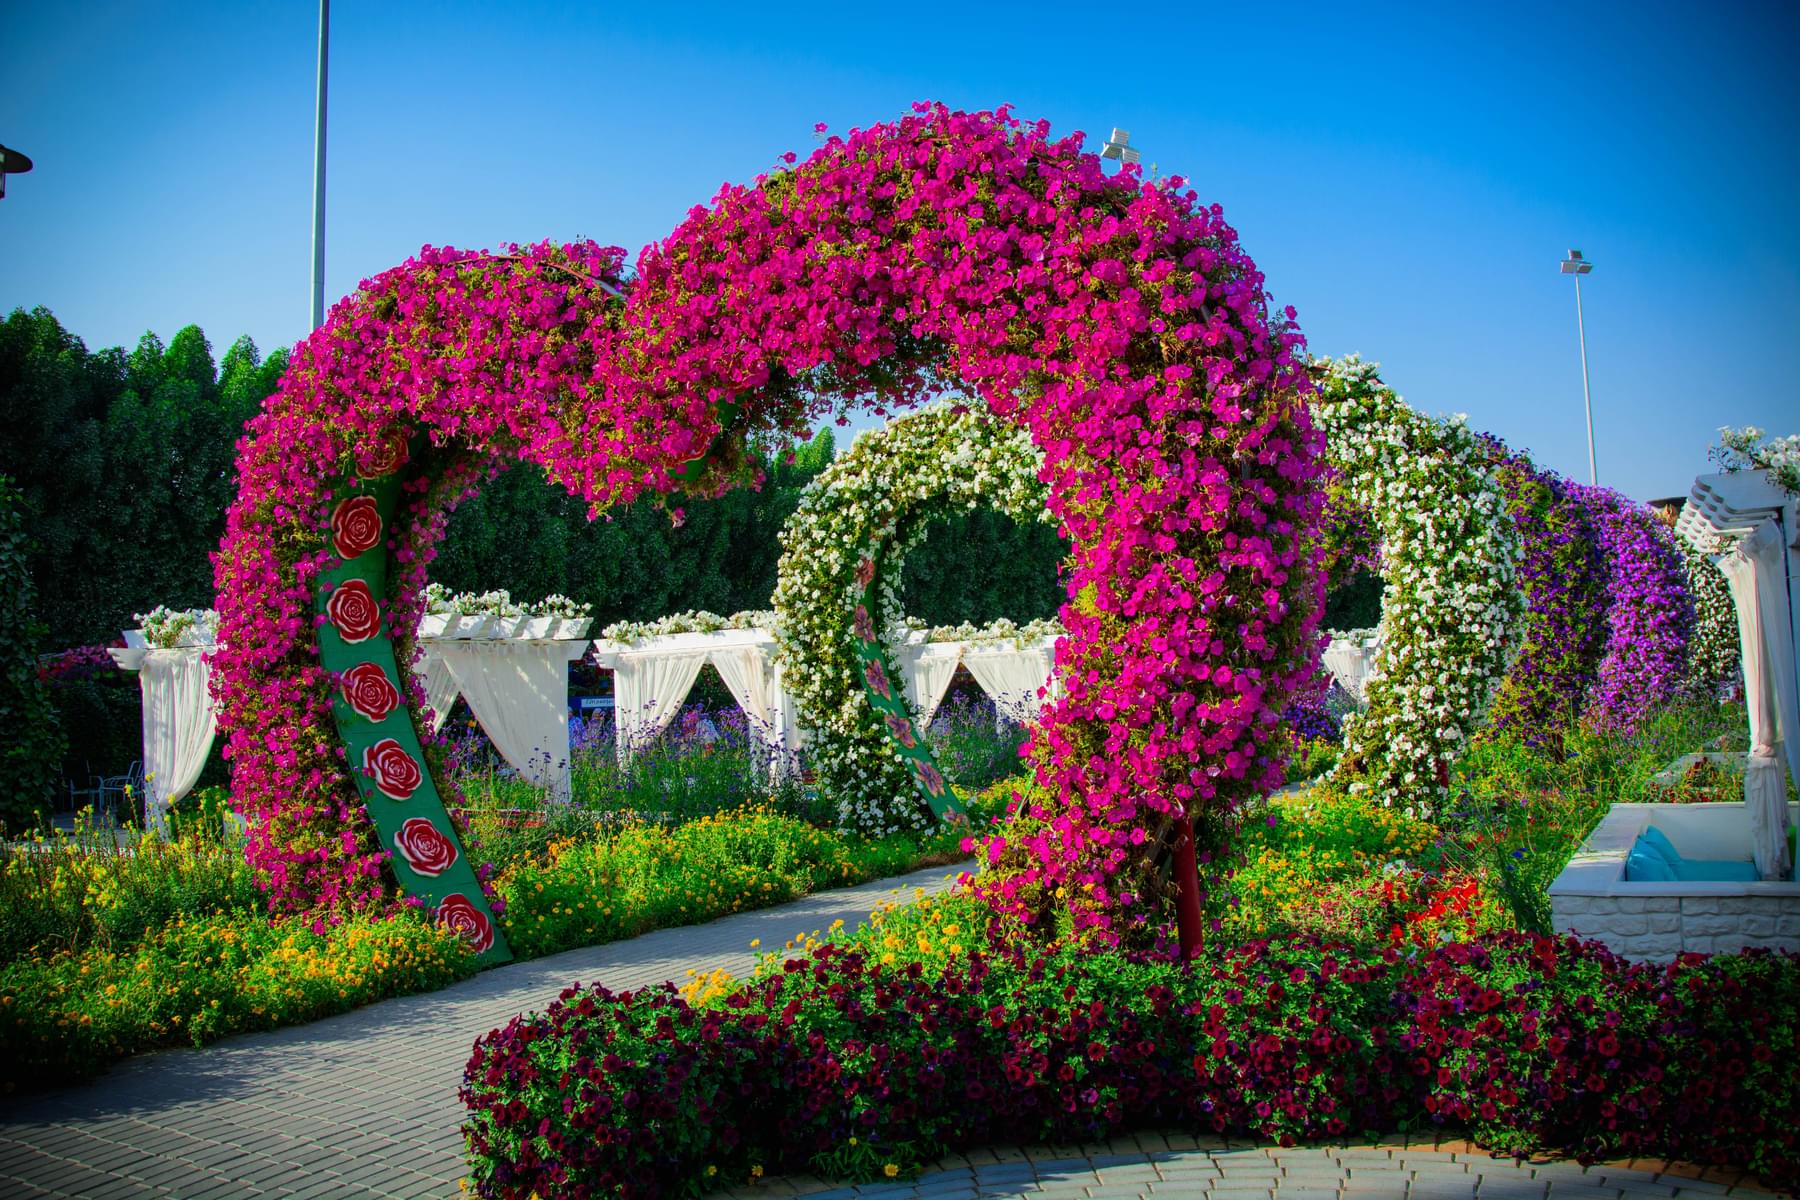 What Is The Best Way to Get to the Miracle Garden?